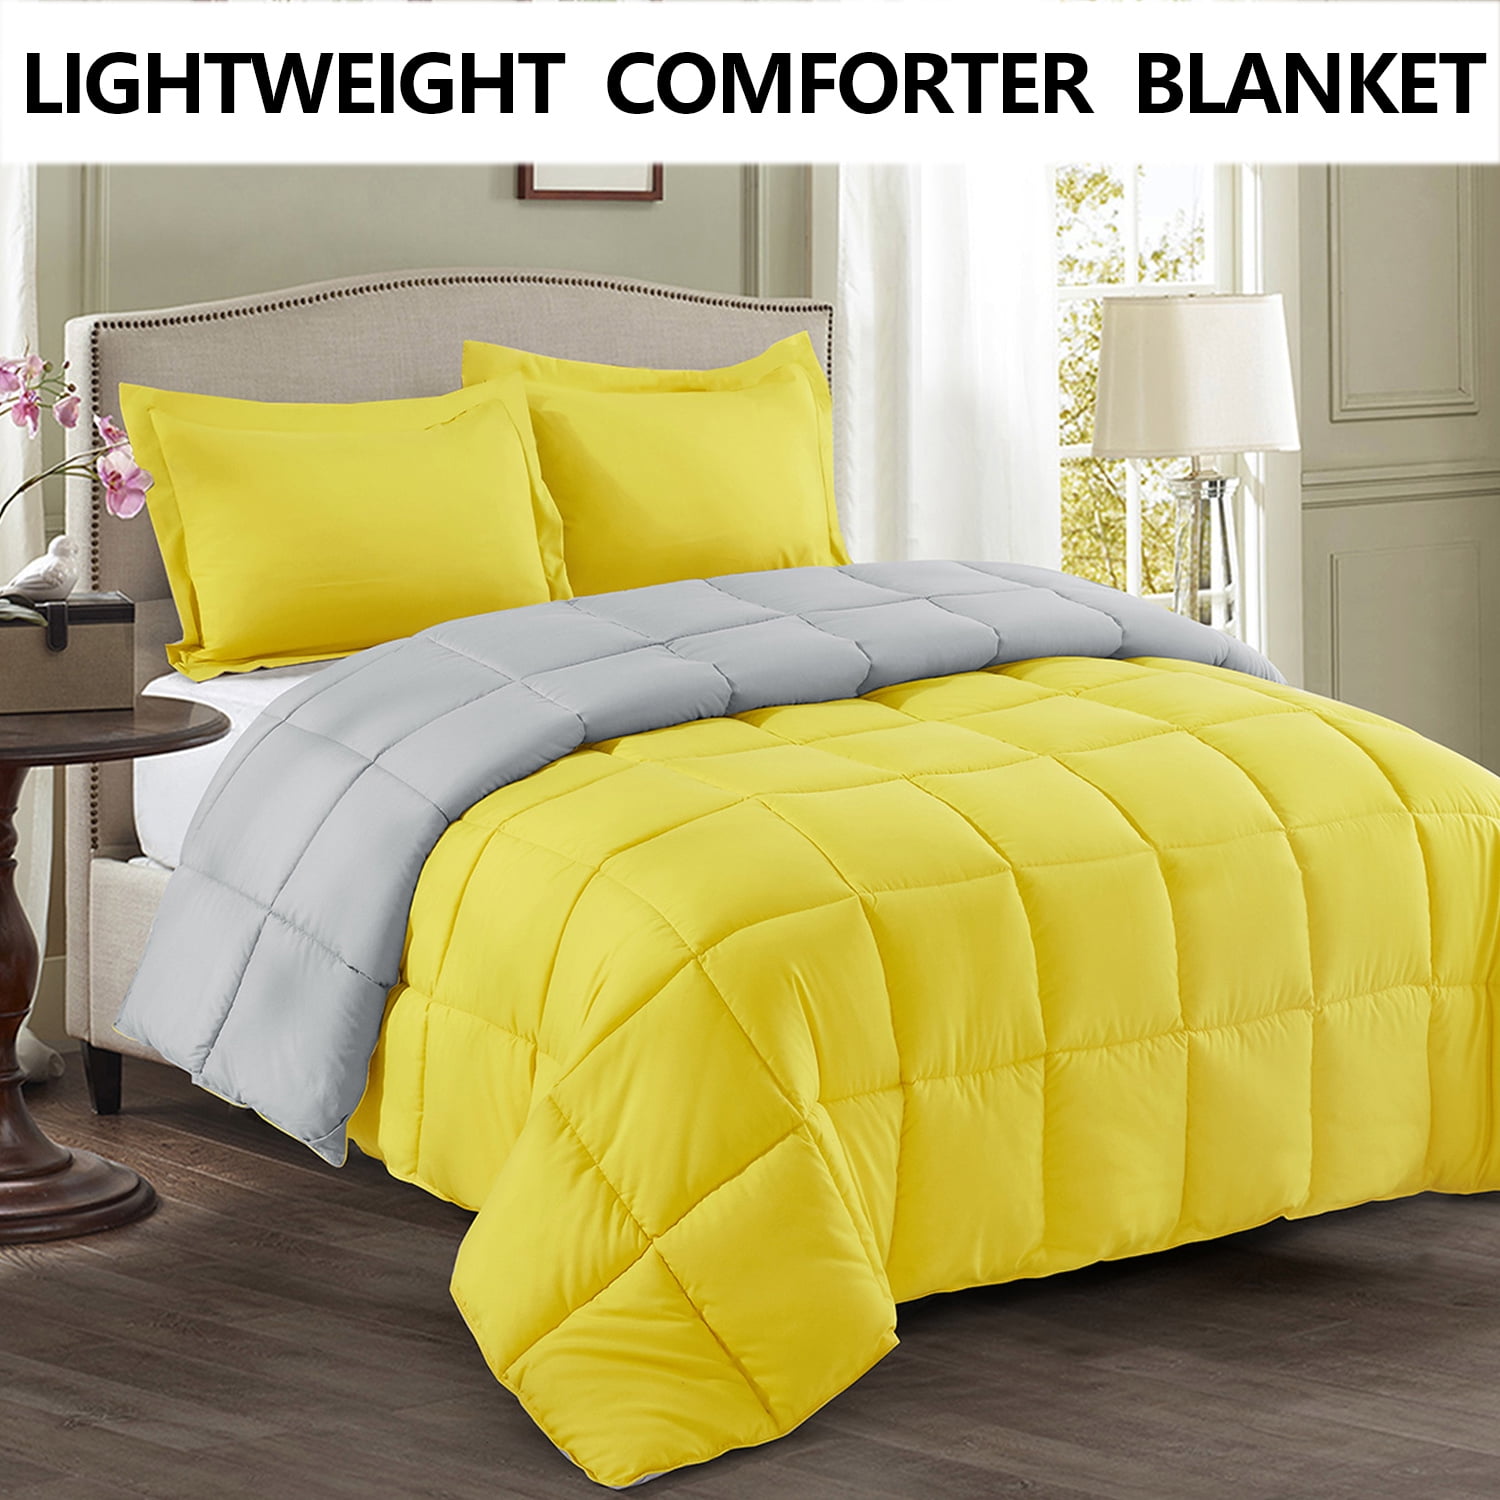 HIG 3pc Down Alternative Comforter Set Soft Hypoallergenic Quilted Duvet Insert with Corner Tabs Fluffy All Season Reversible Comforter with Two Shams Yellow/Light Gray, King/Cal King